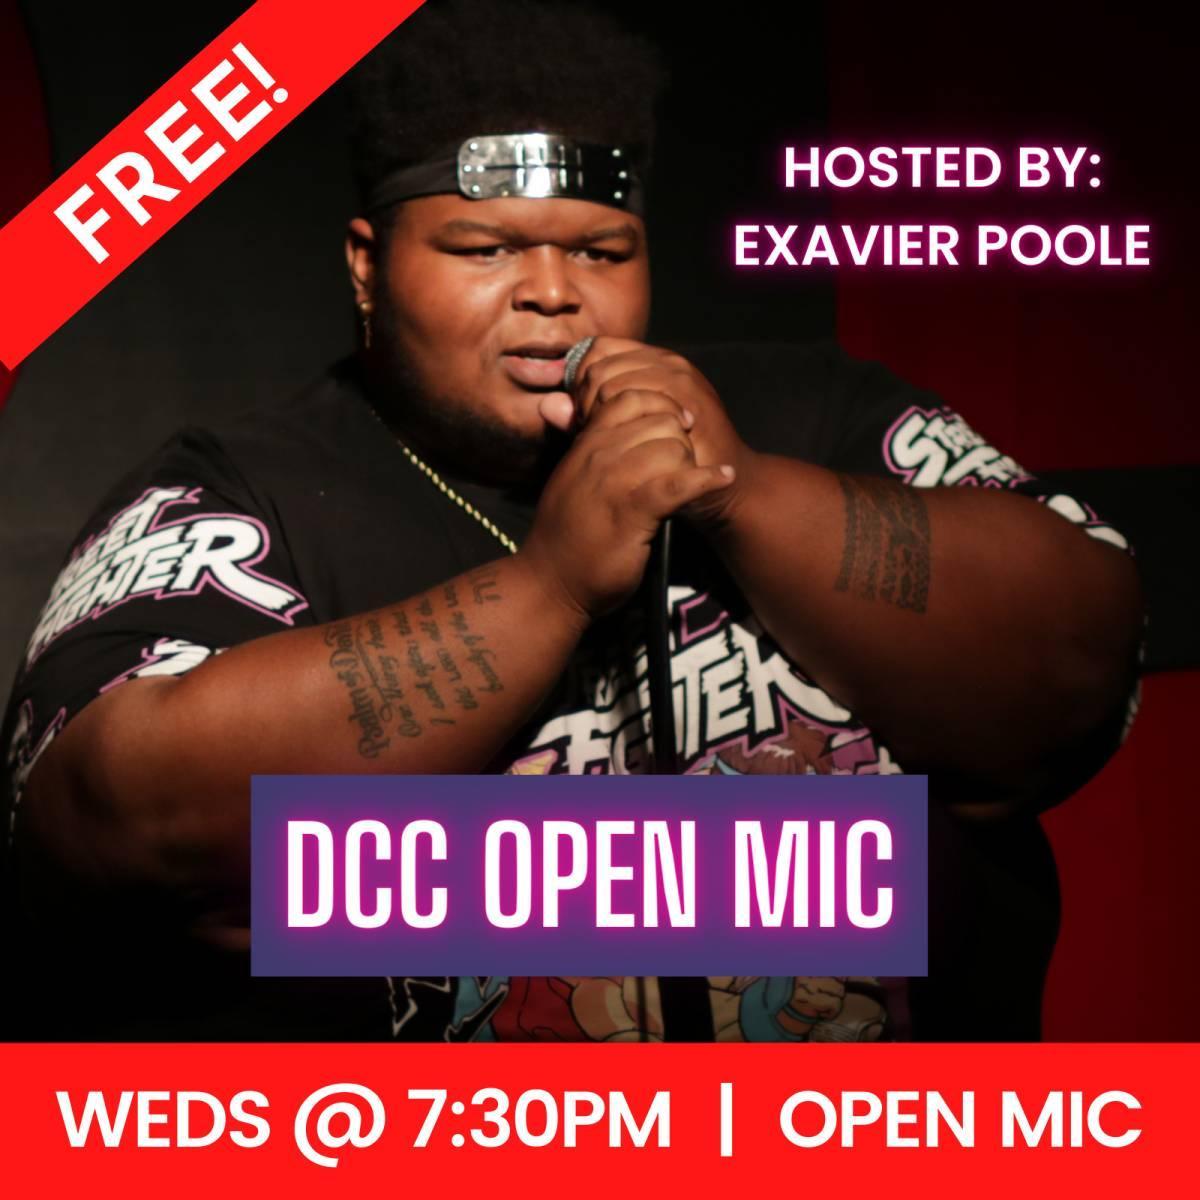 The DCC Open Mic